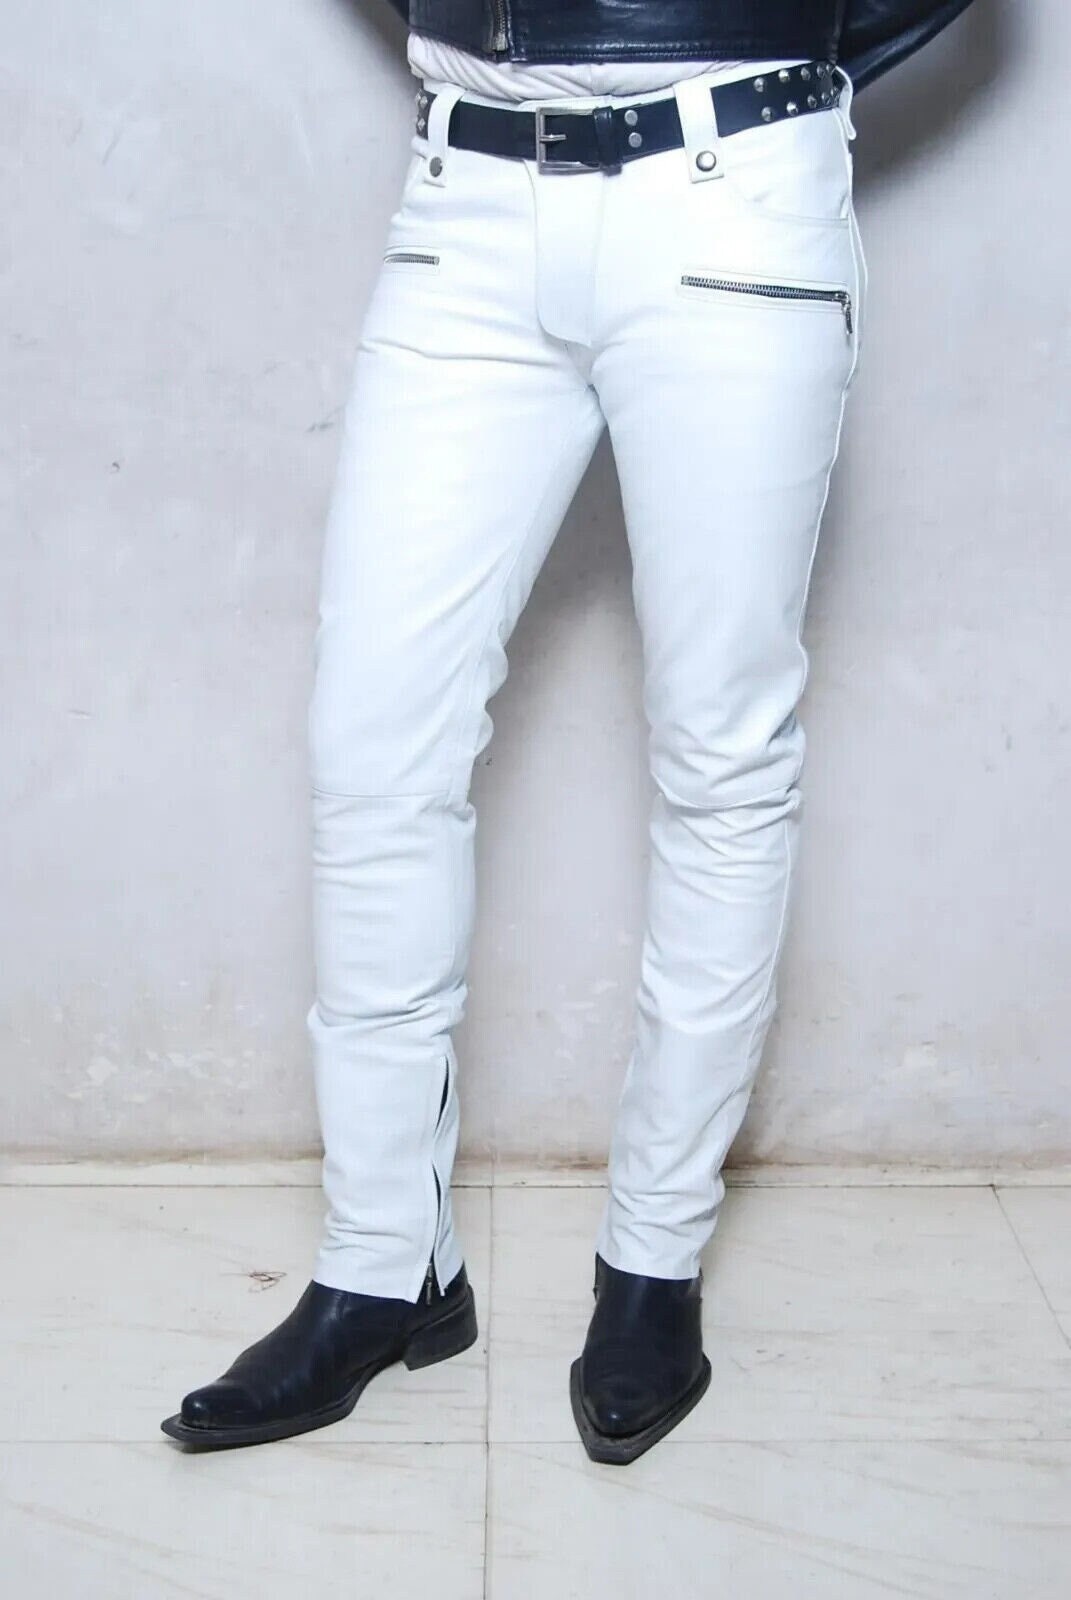 Buy White Leather Pants Online In India -  India